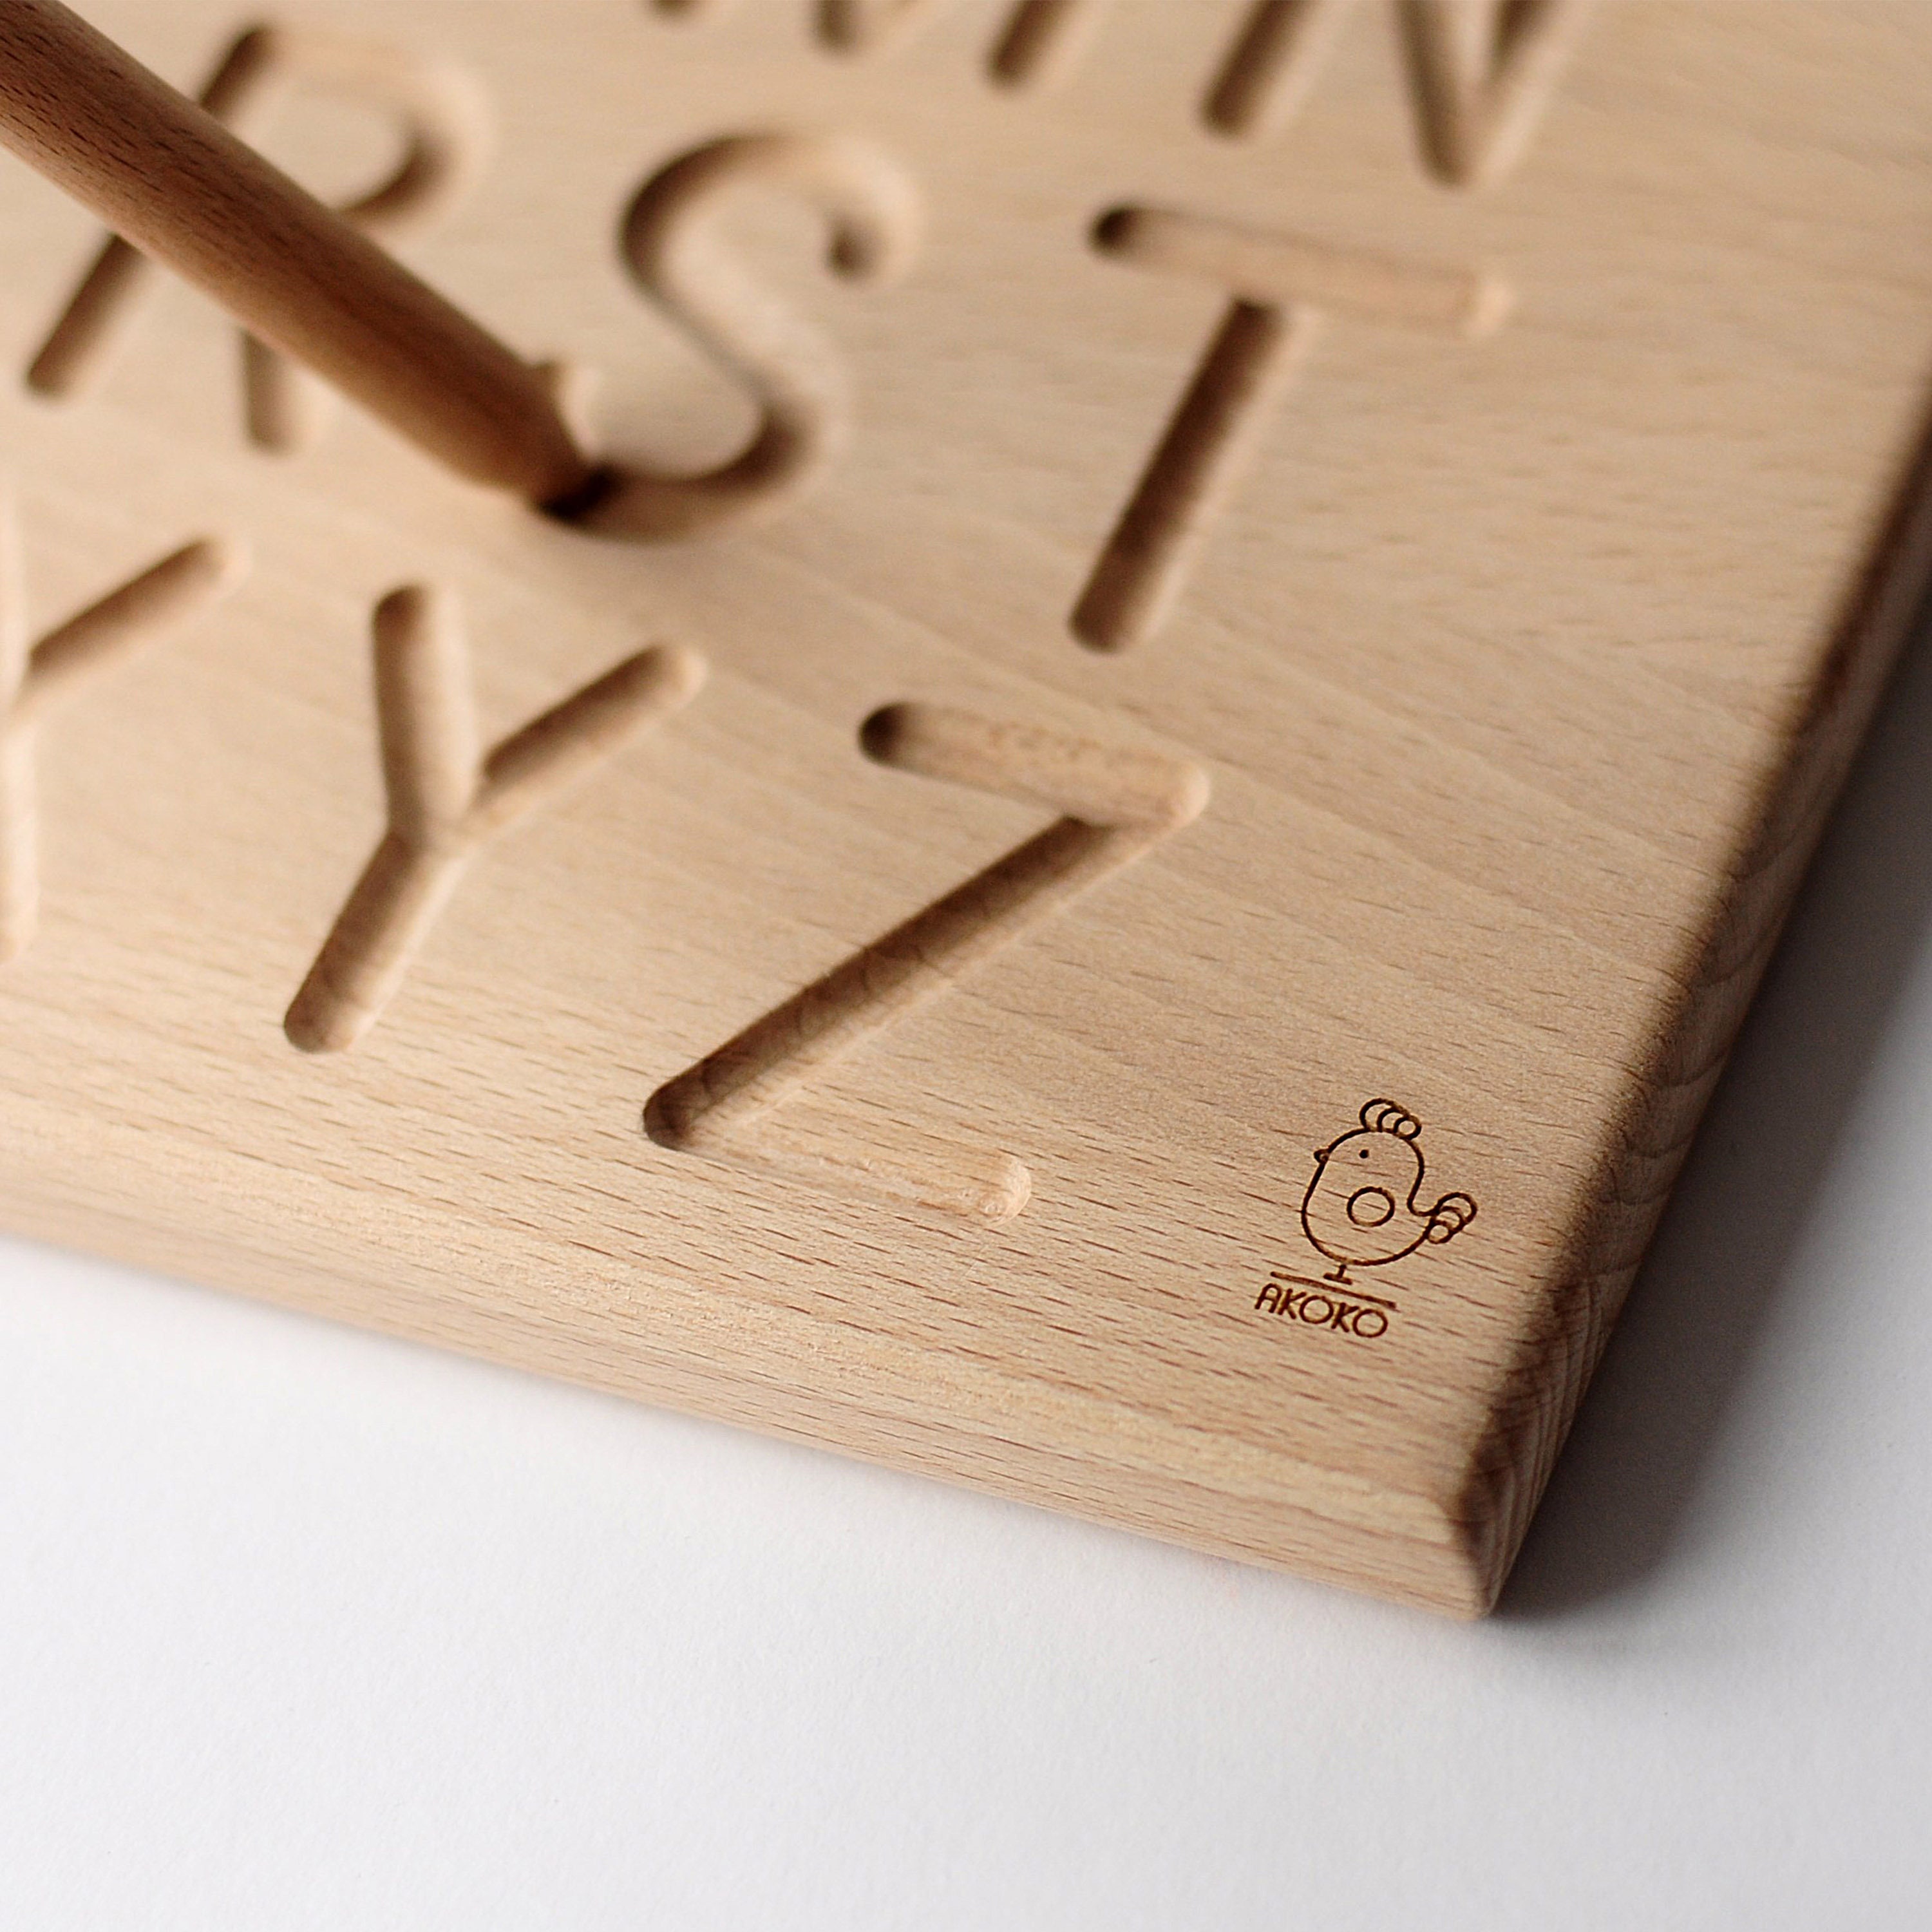 Alphabet Wooden Tracing Board, Assistive Technology